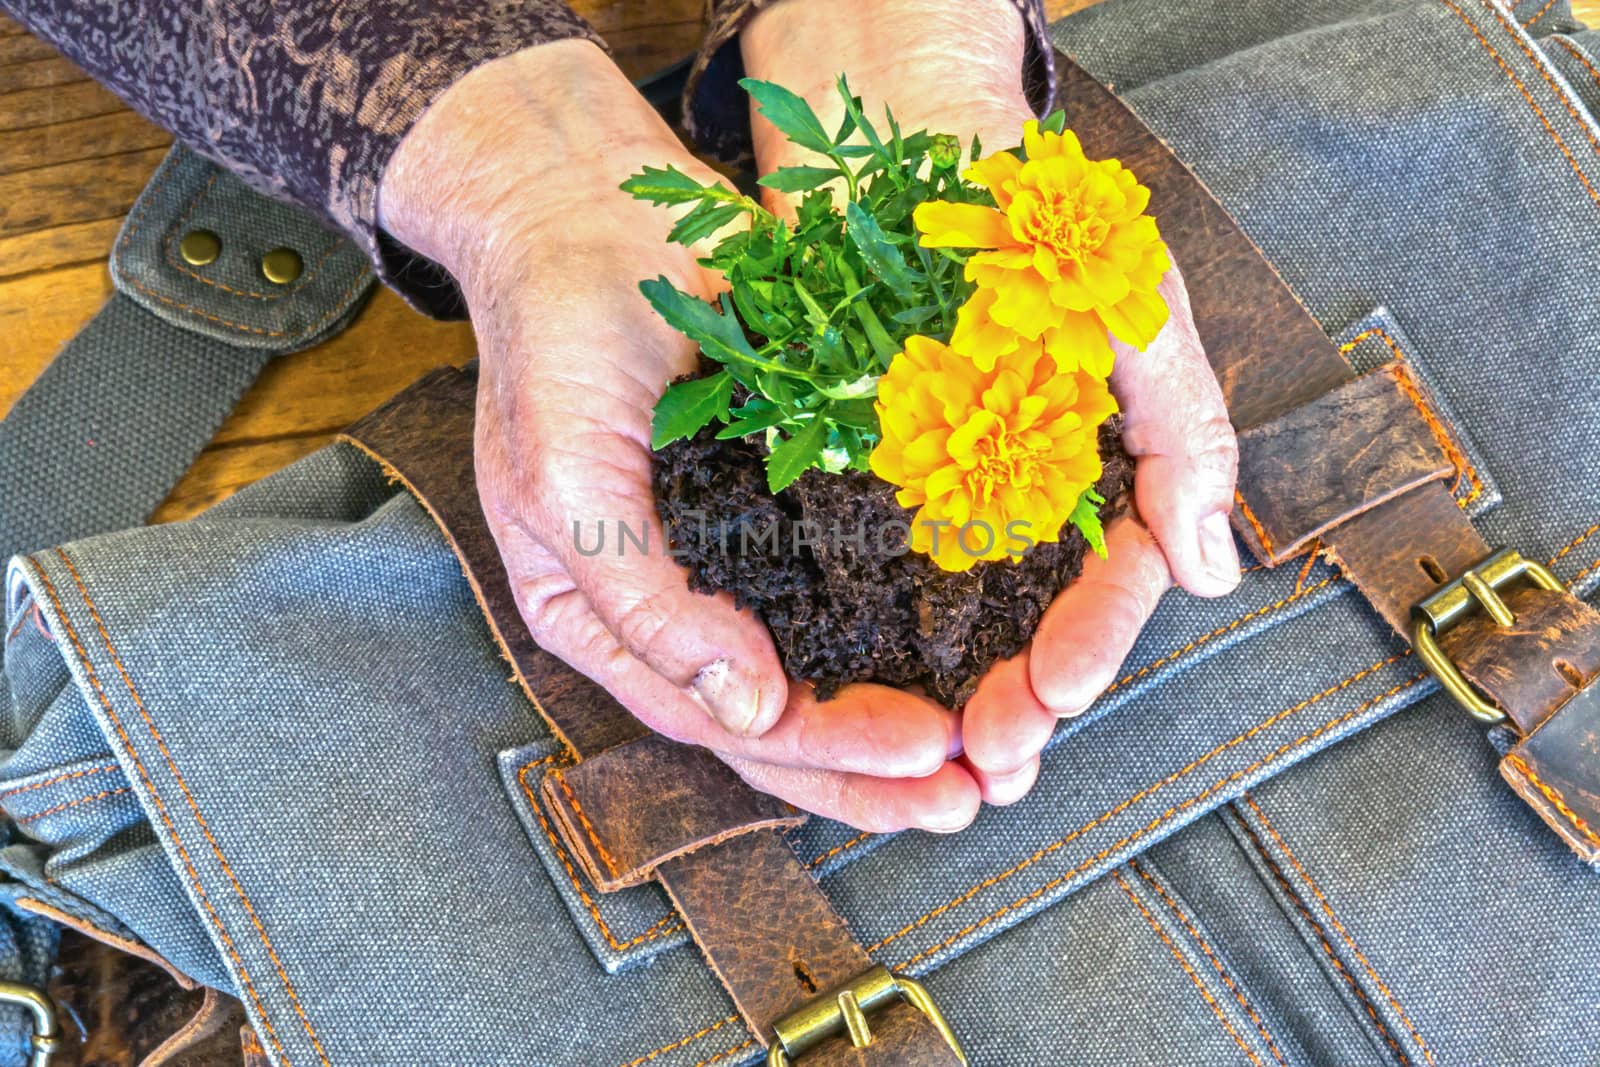 Hands Holding Marigolds in Dirt With Blue Satchel on Wooden Table